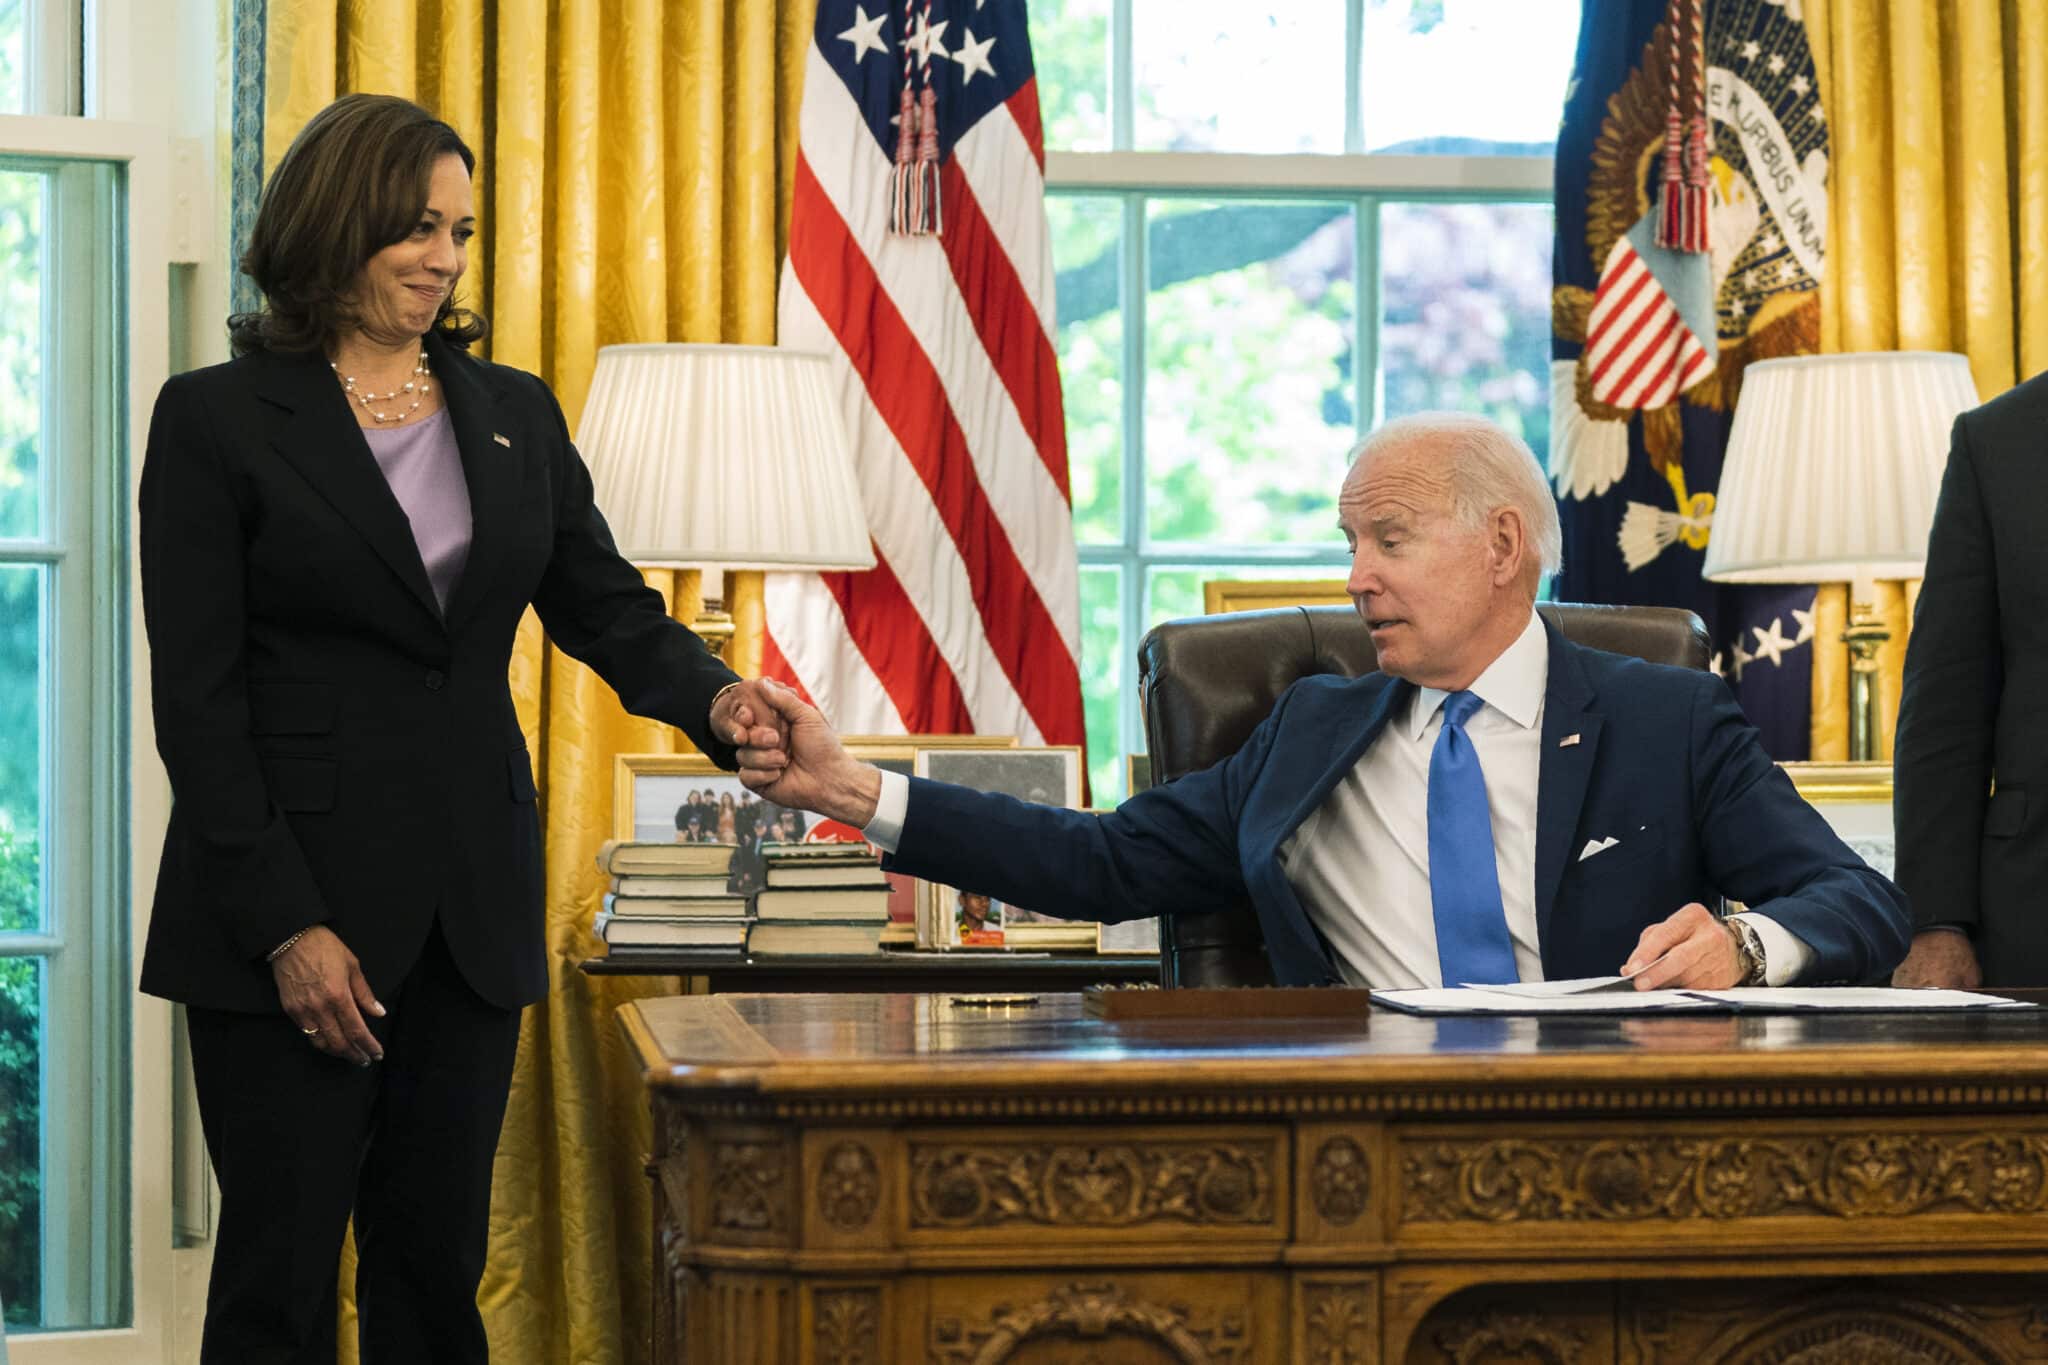 President Joe Biden acknowledges Vice President Kamala Harris during the signing of the Ukraine Democracy Defense Lend-Lease Act of 2022 in the Oval Office of the White House, Monday, May 9, 2022, in Washington. (AP Photo/Manuel Balce Ceneta)